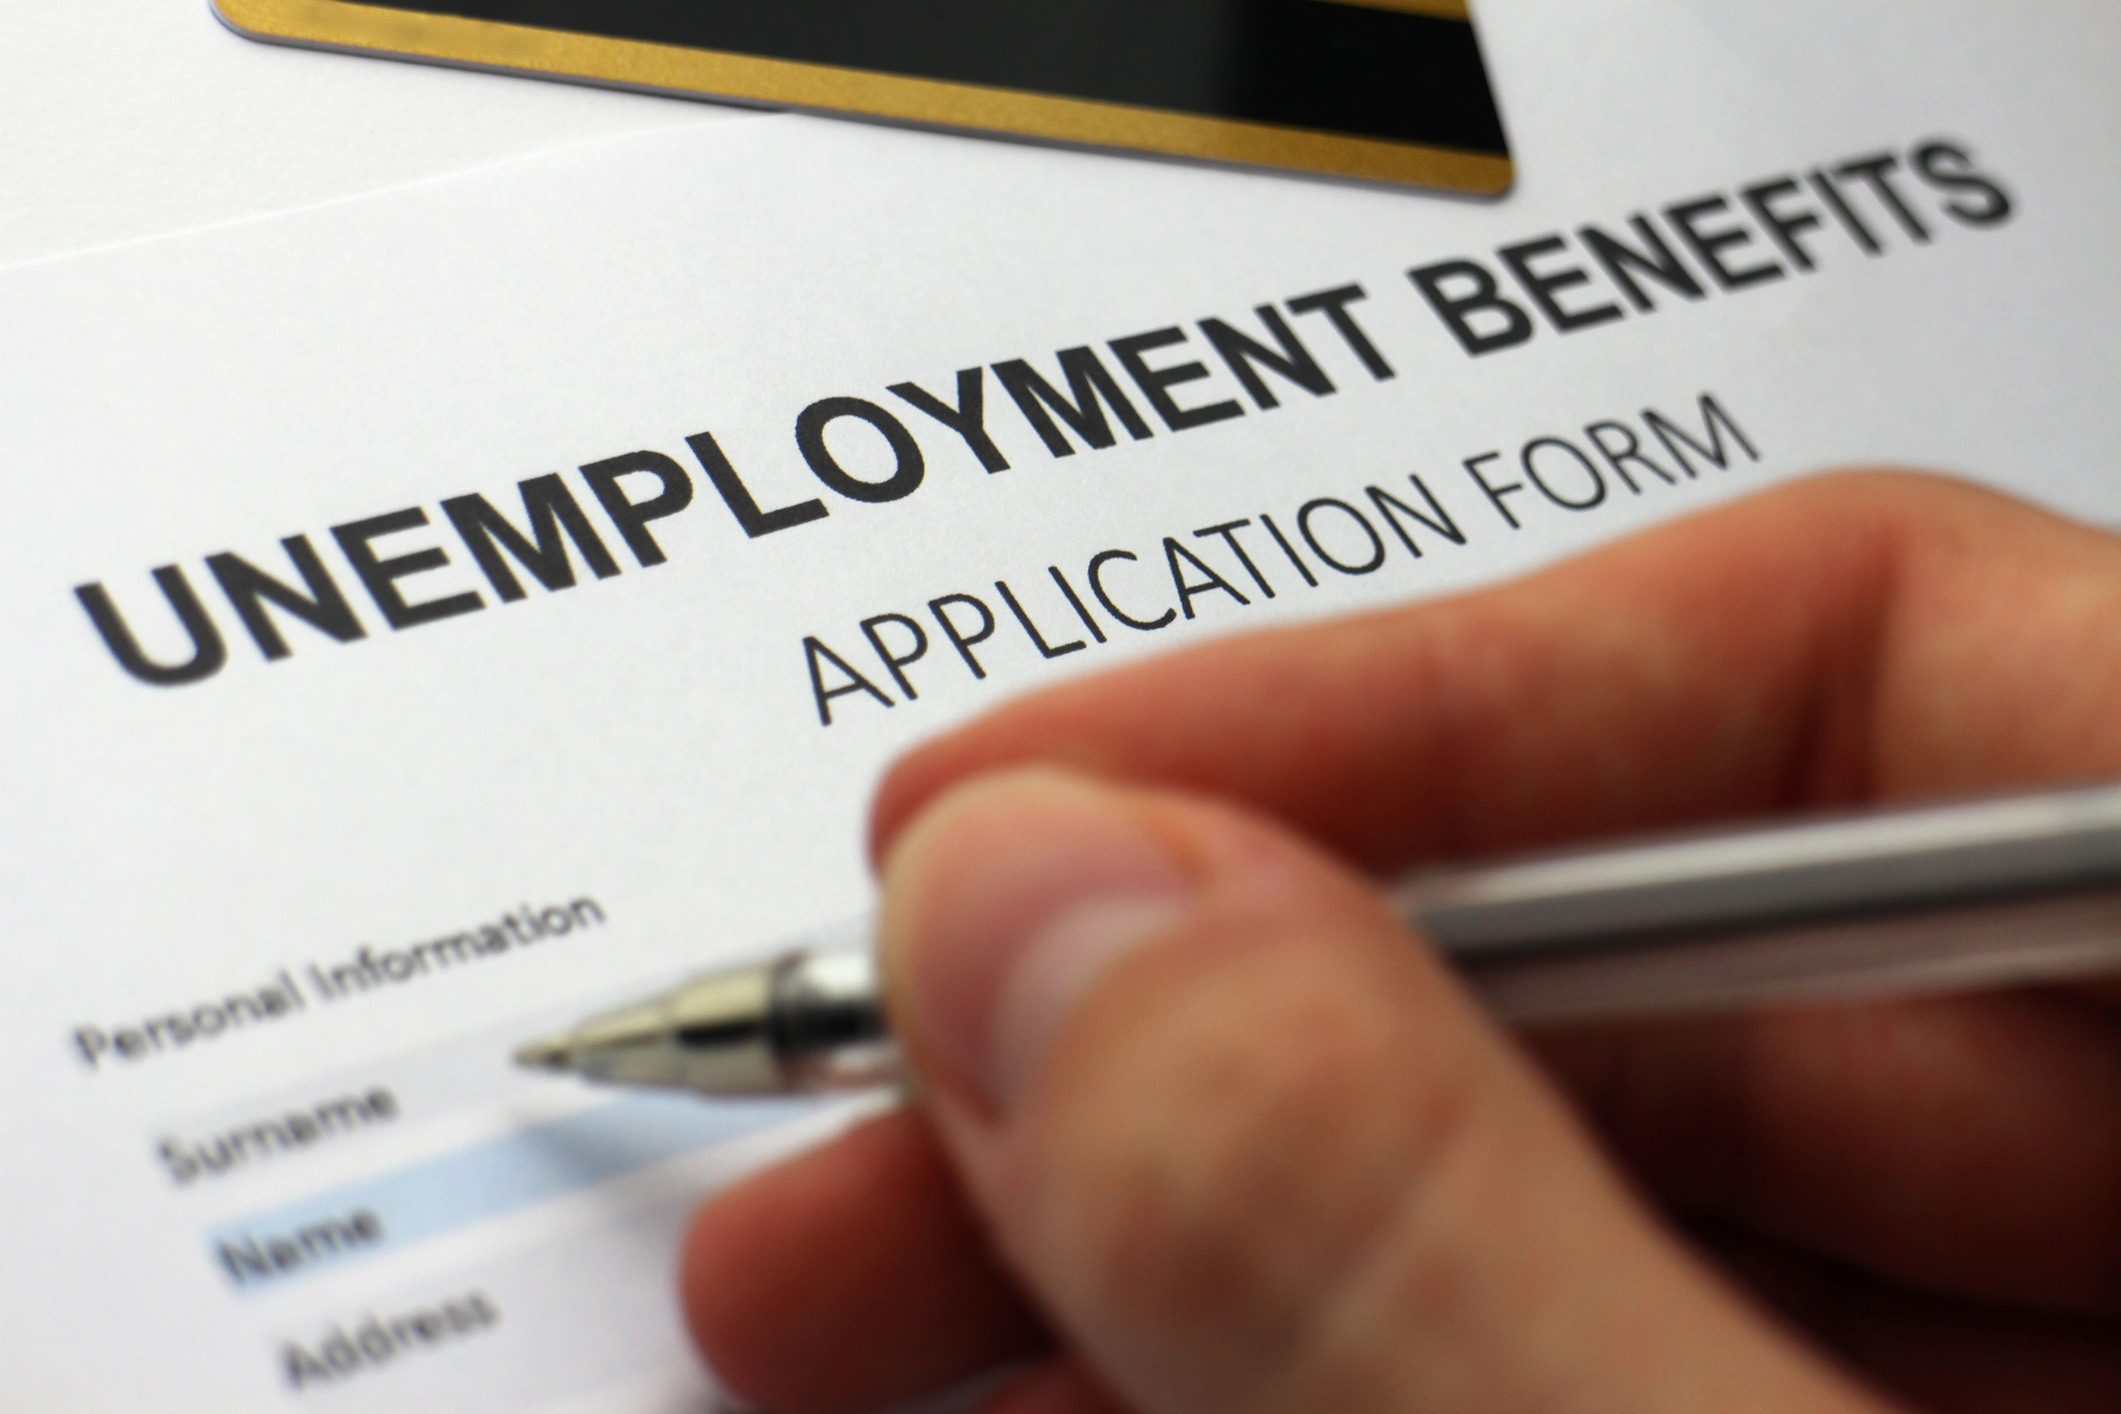 Frequently Asked Questions About Unemployment Benefits for the